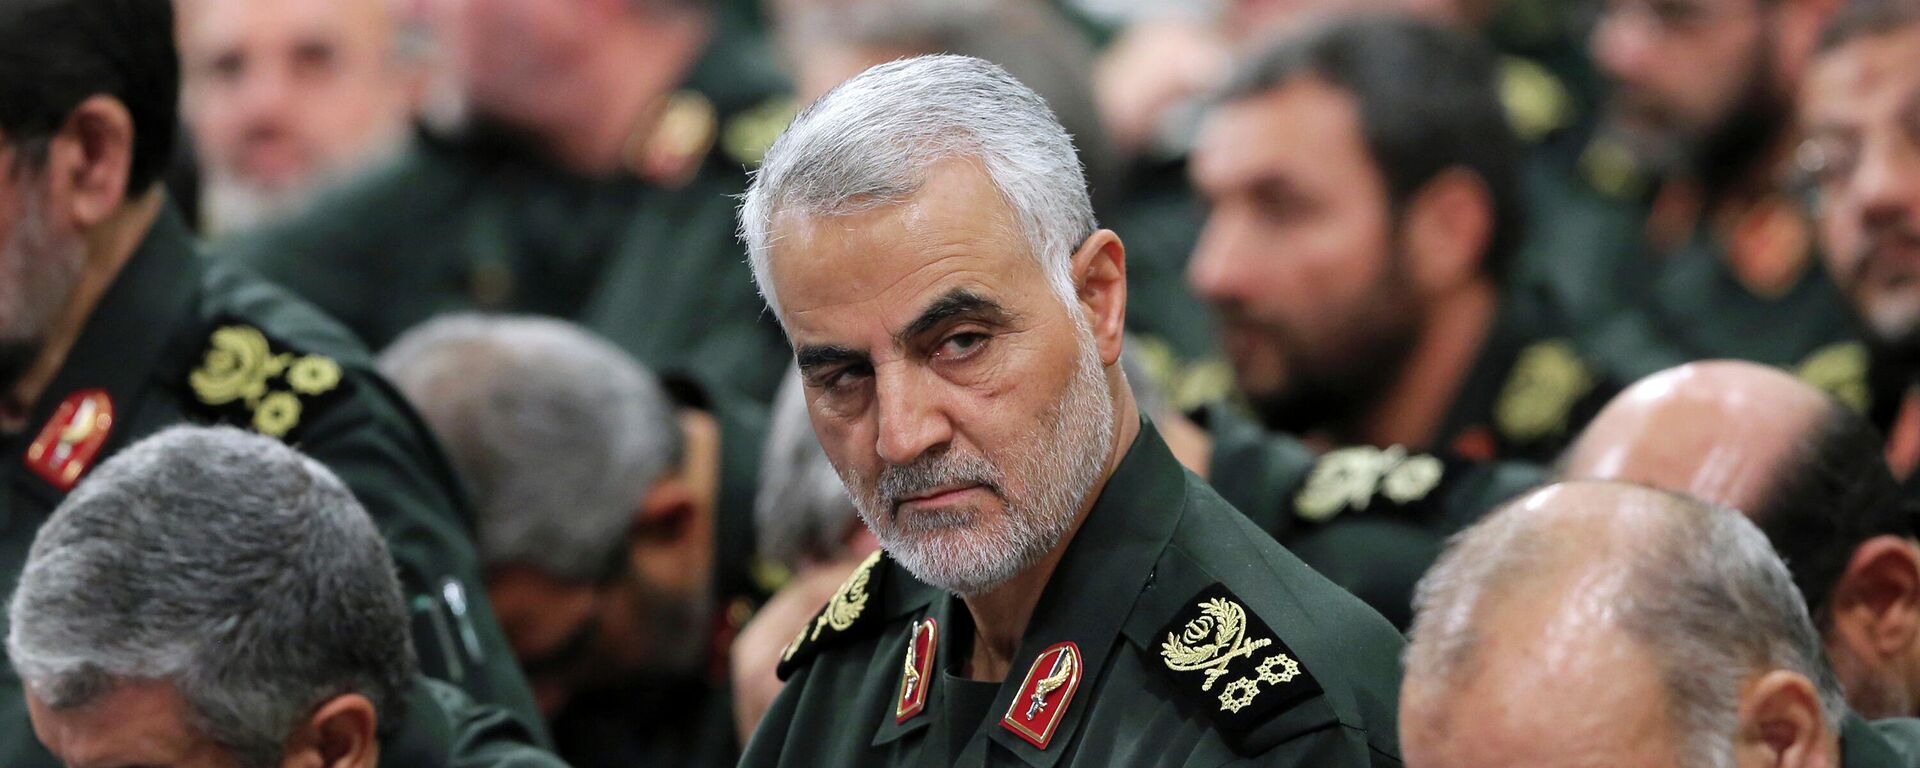 In this Sept. 18, 2016, file photo provided by an official website of the office of the Iranian supreme leader, Revolutionary Guard Gen. Qassem Soleimani, center, attends a meeting in Tehran, Iran. Iran executed Mahmoud Mousavi Majd convicted of providing information to the United States and Israel about the prominent Revolutionary Guard general later killed by a U.S. drone strike, state TV reported on Monday, July 20, 2020. (Office of the Iranian Supreme Leader via AP, File) - Sputnik International, 1920, 13.04.2022